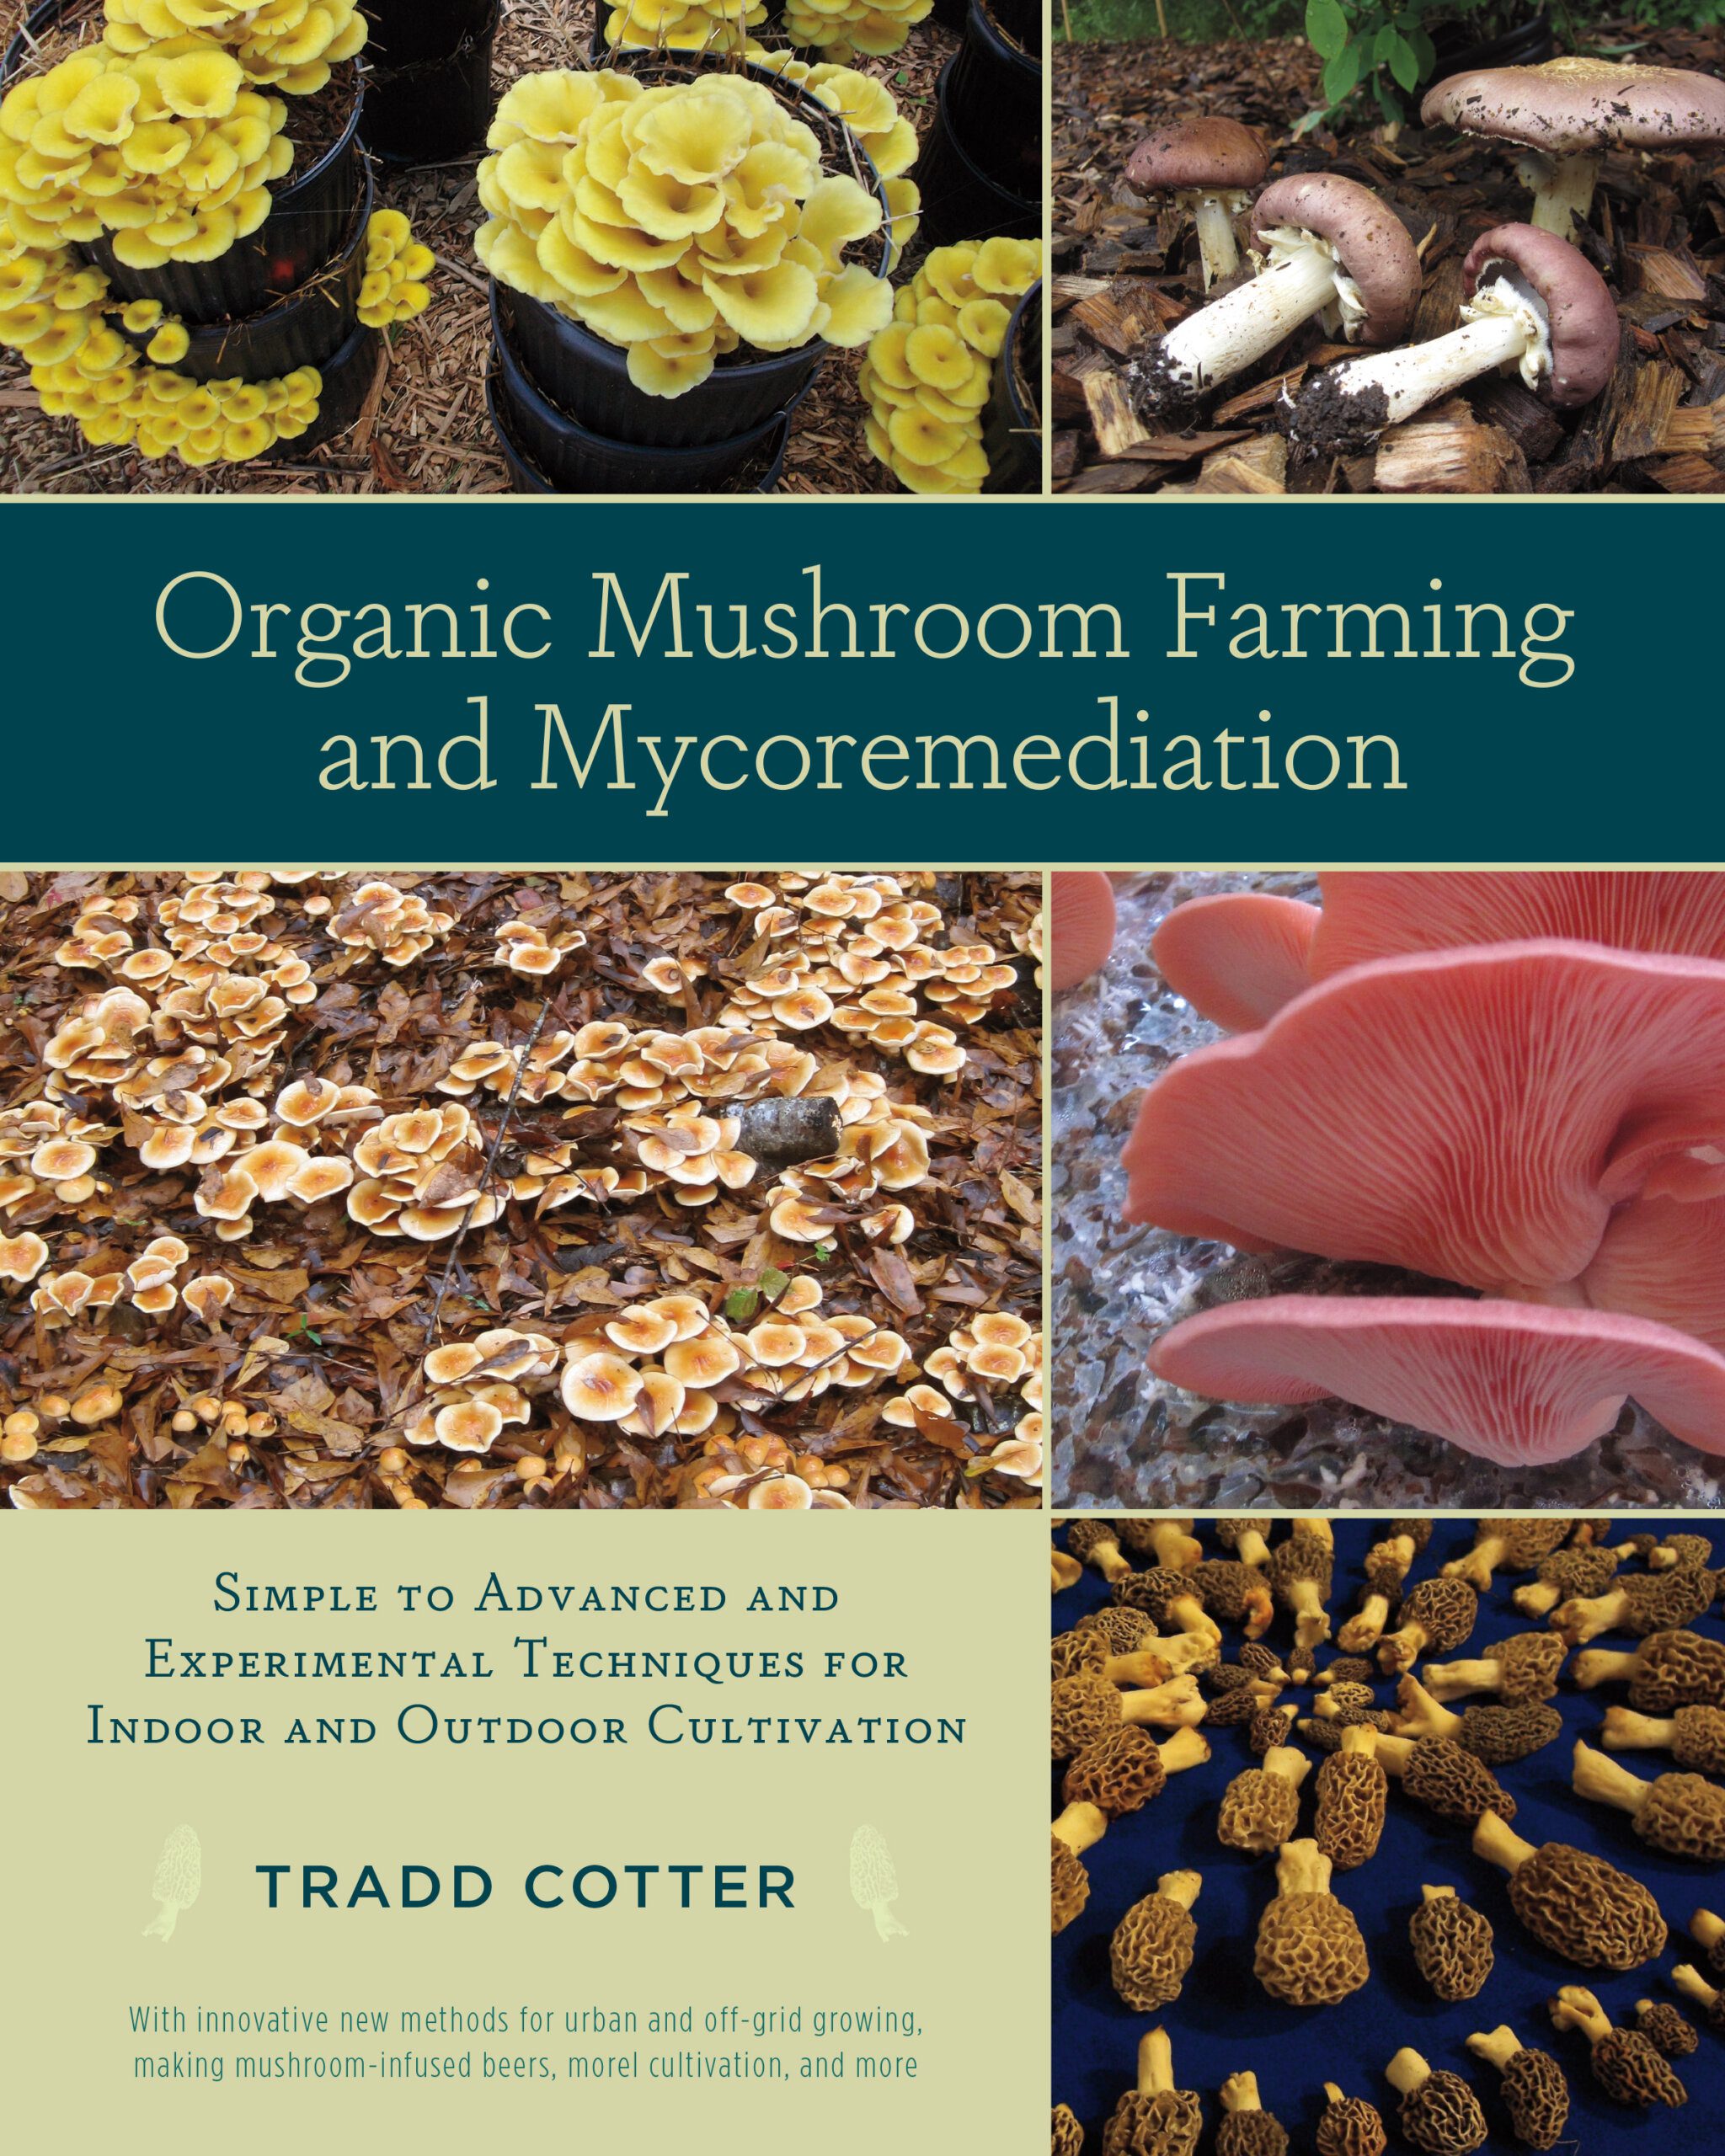 PASA Event Sponsorship from https://shop.mushroommountain.com/collections/books-gifts/products/organic-mushroom-farming-and-mycoremediation